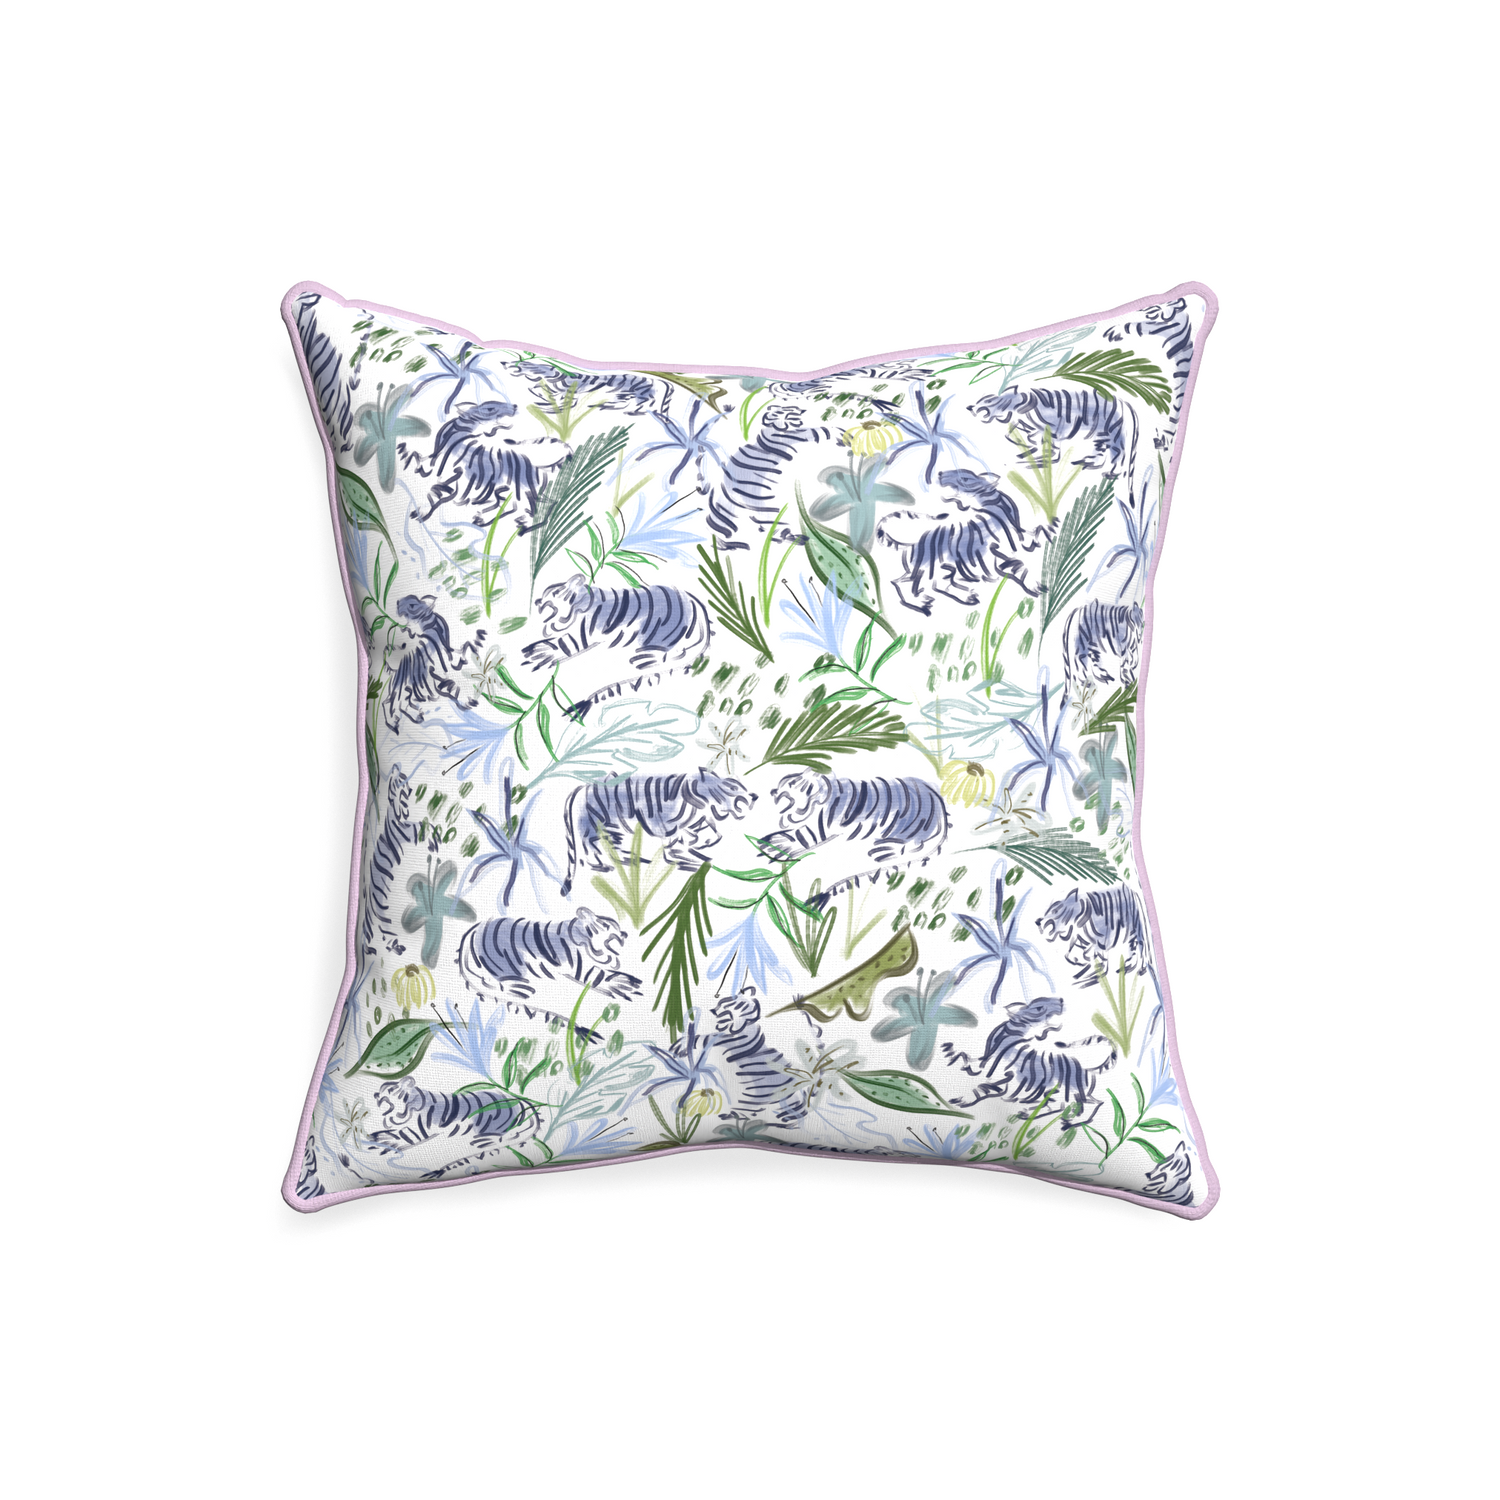 20-square frida green custom pillow with l piping on white background